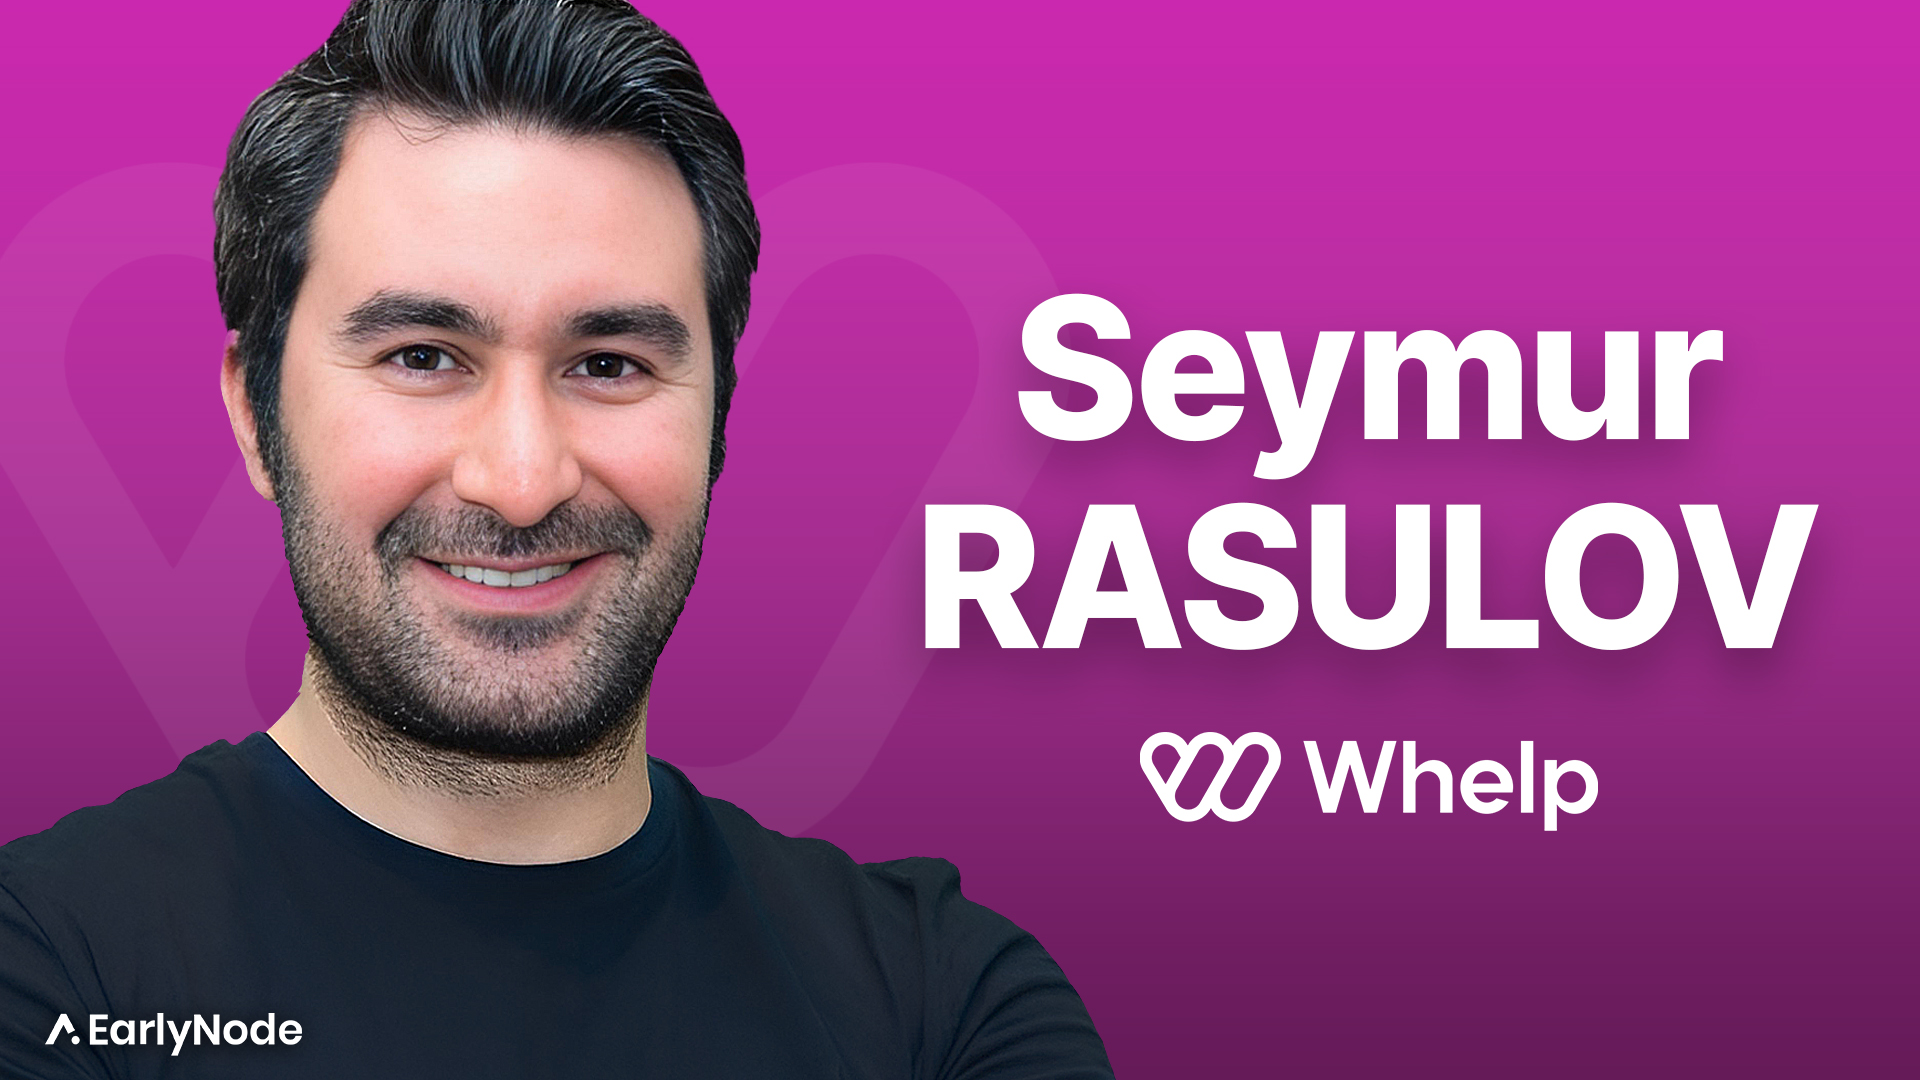 $10K in the Bank to 1600+ Clients: How Seymur Rasulov Grew Whelp.co into a Customer Support Titan